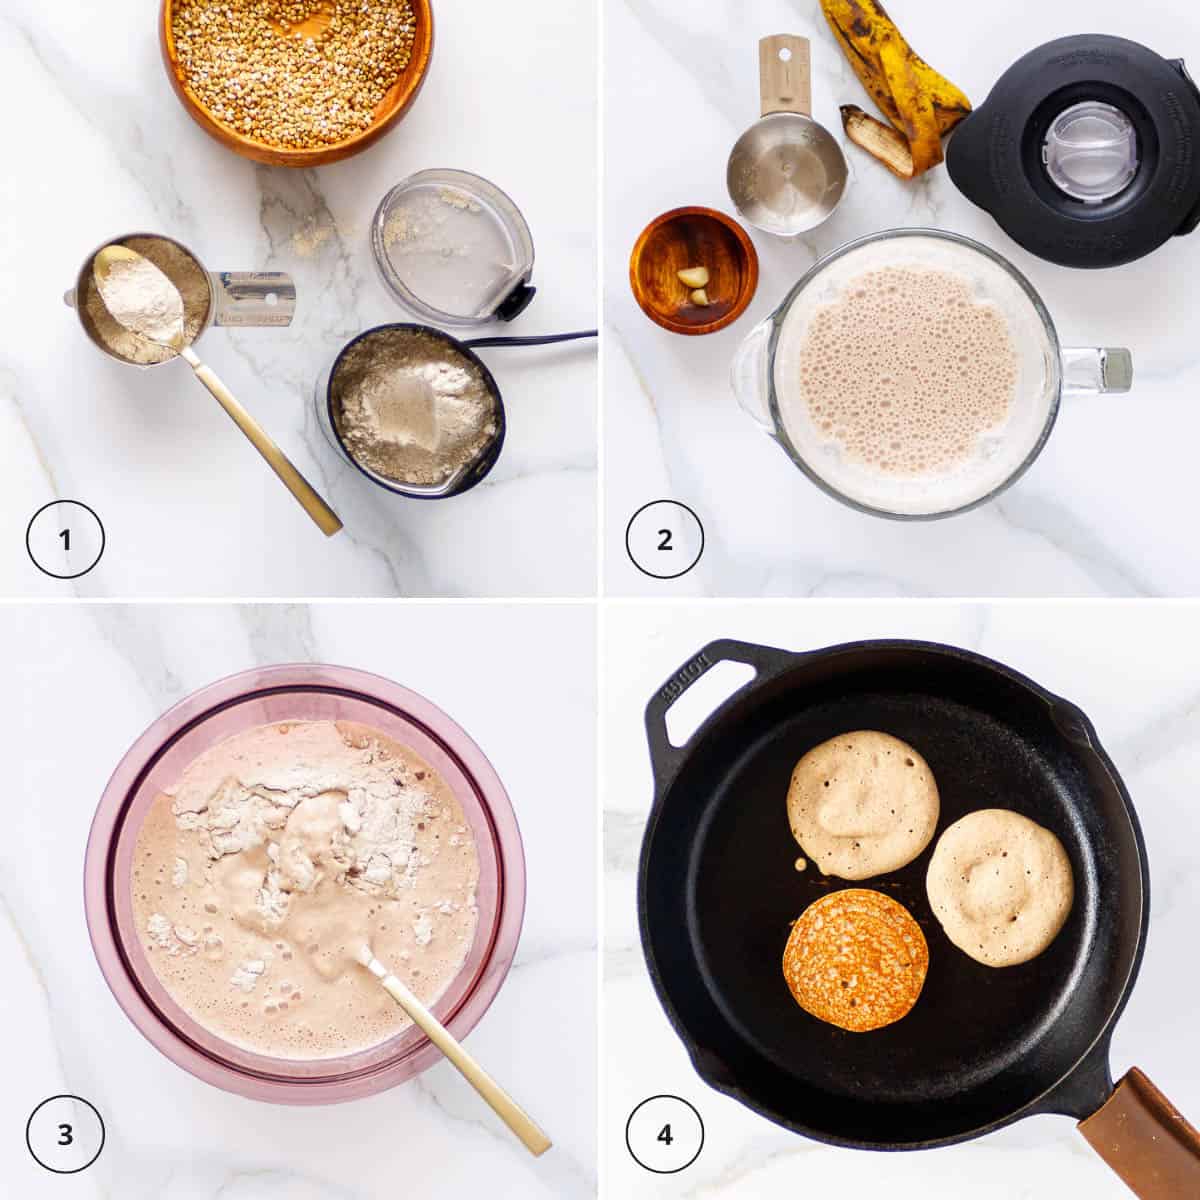 Grind buckwheat, blend with macadamia nuts and banana, mix batter and fry pancakes.